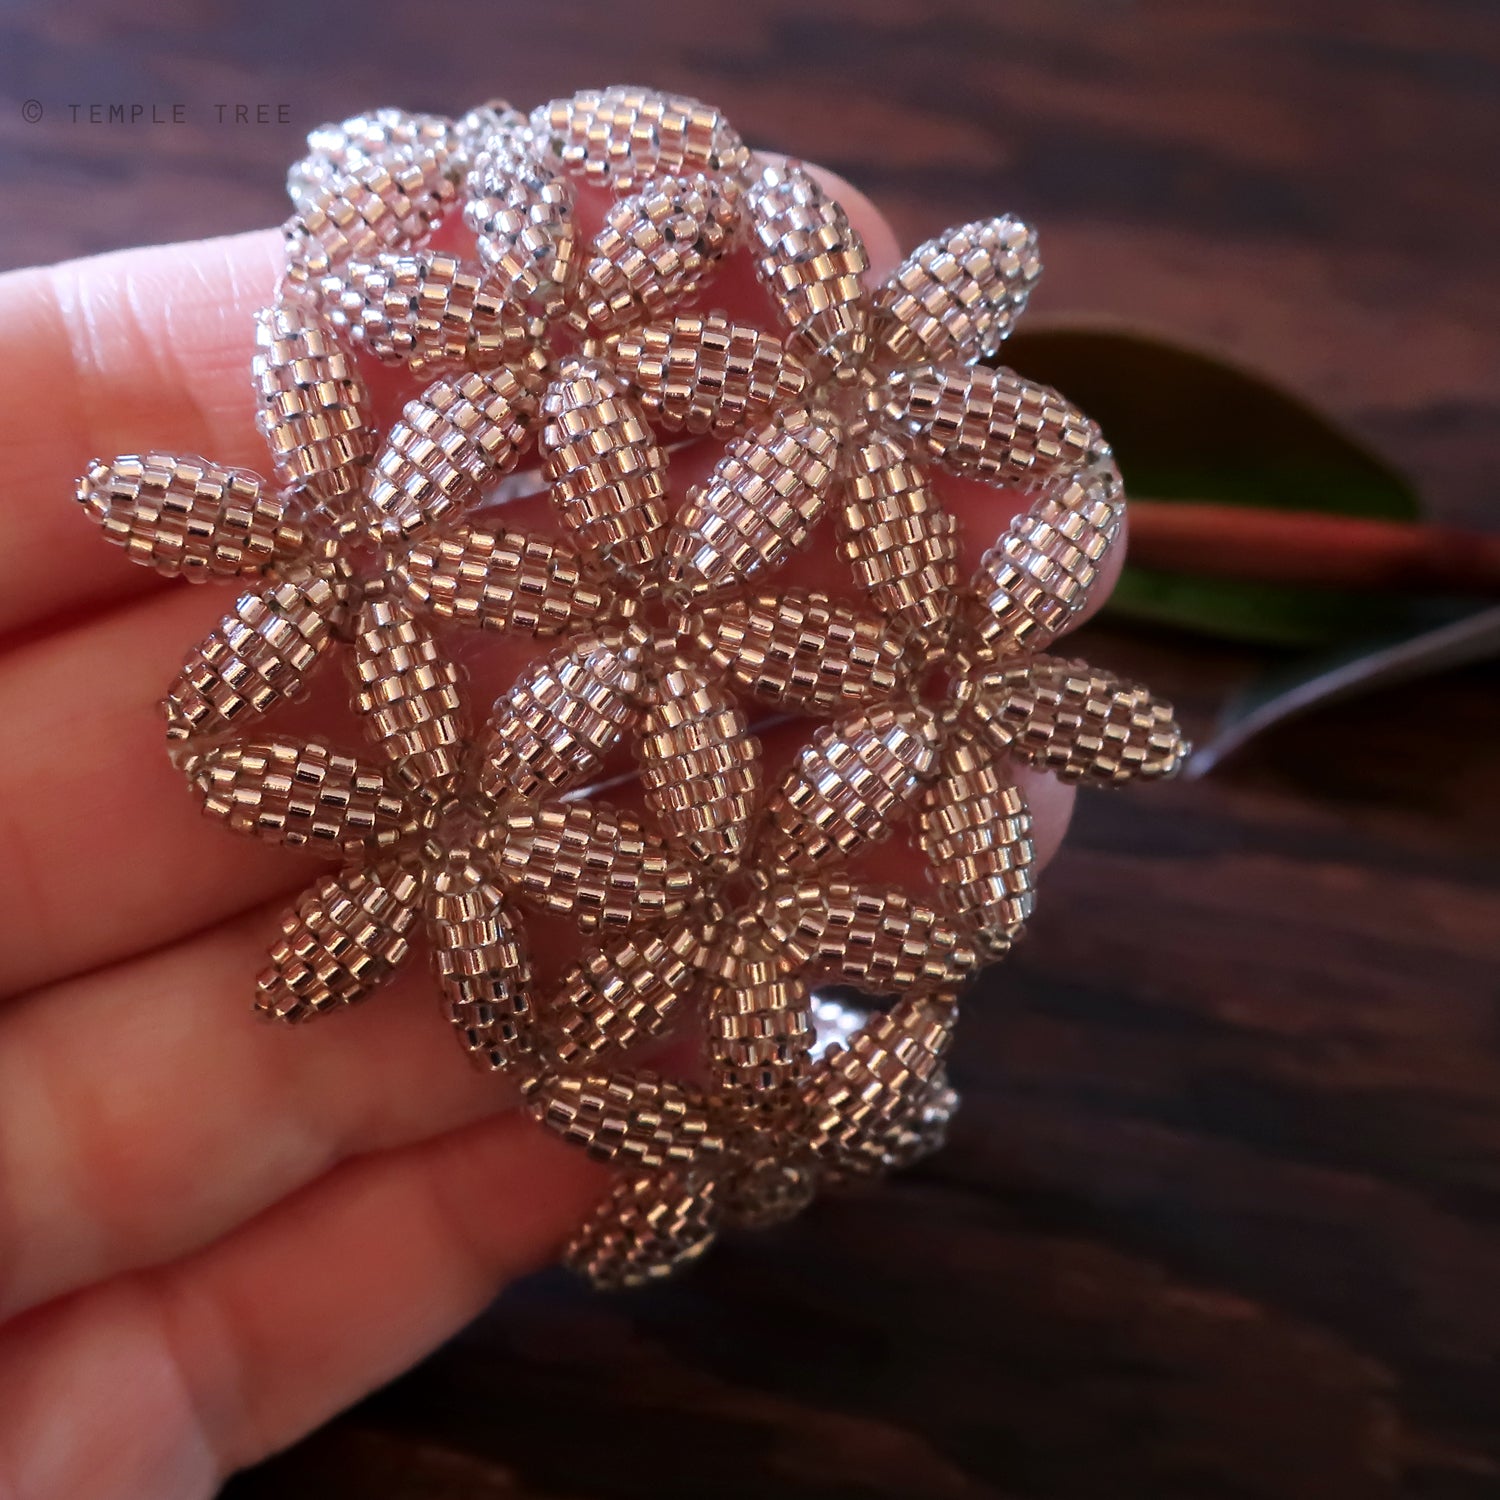 Temple Tree Flower of Life Beaded Bracelet Style 1 - Sparkly Copper